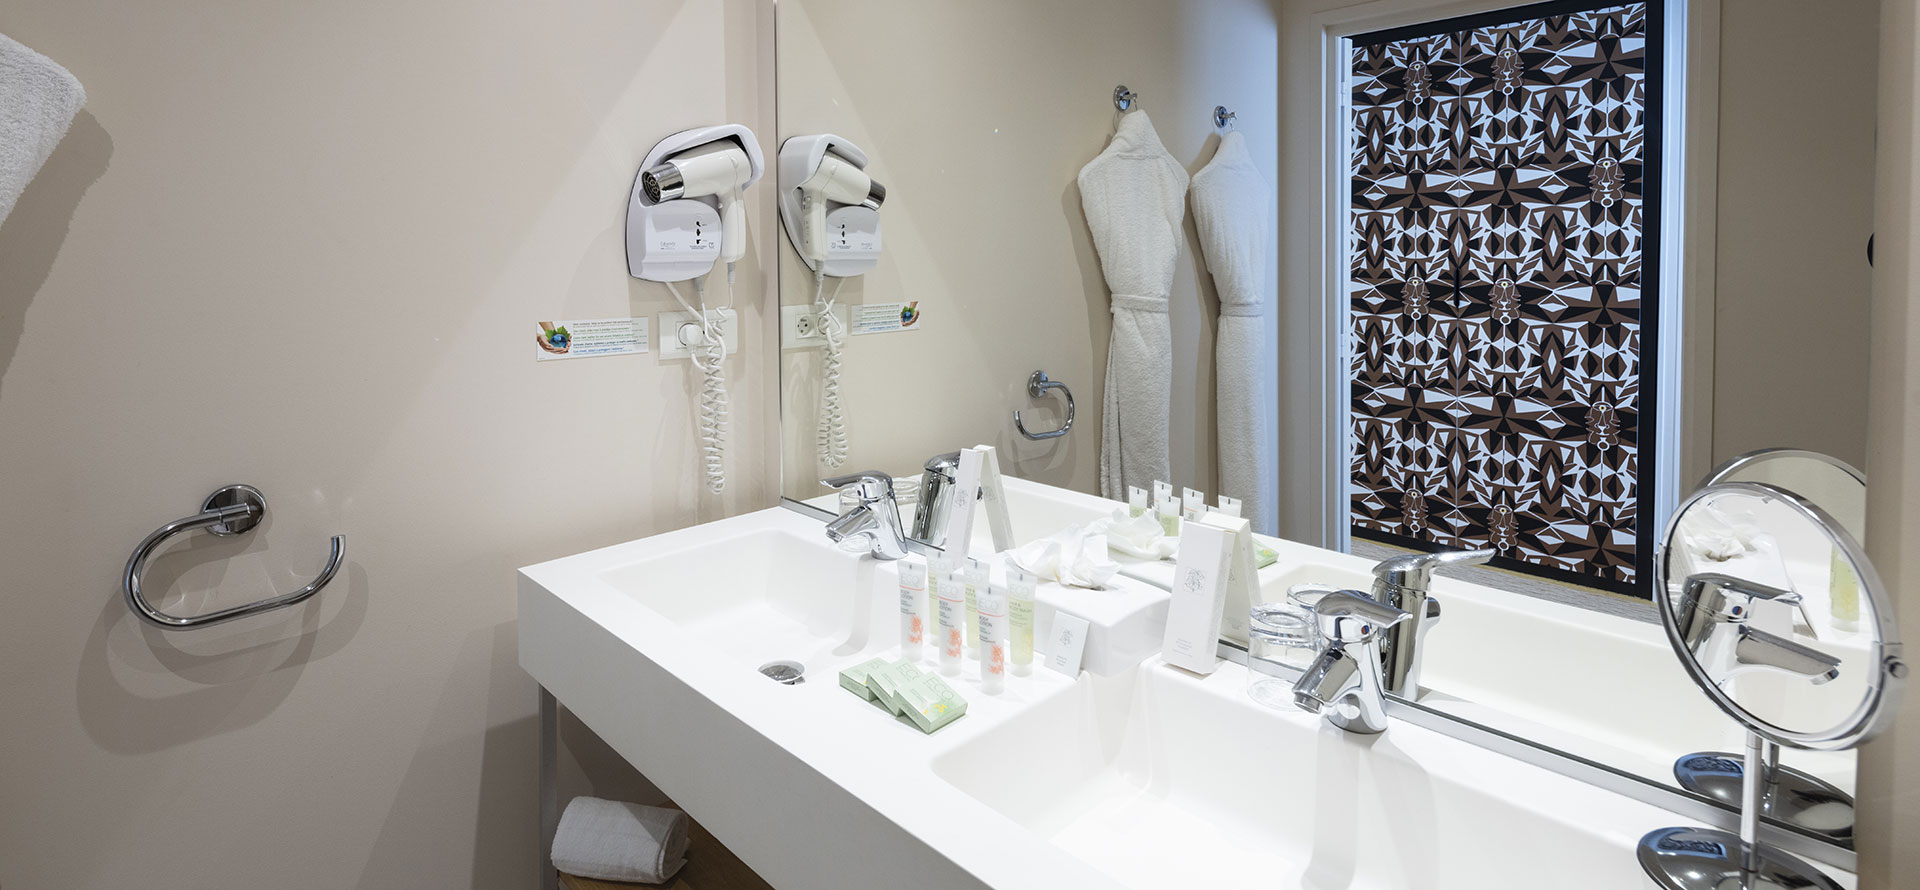 Bathroom in the connecting room at the Palmyra Golf, a 4-star hotel in Cap d'Agde